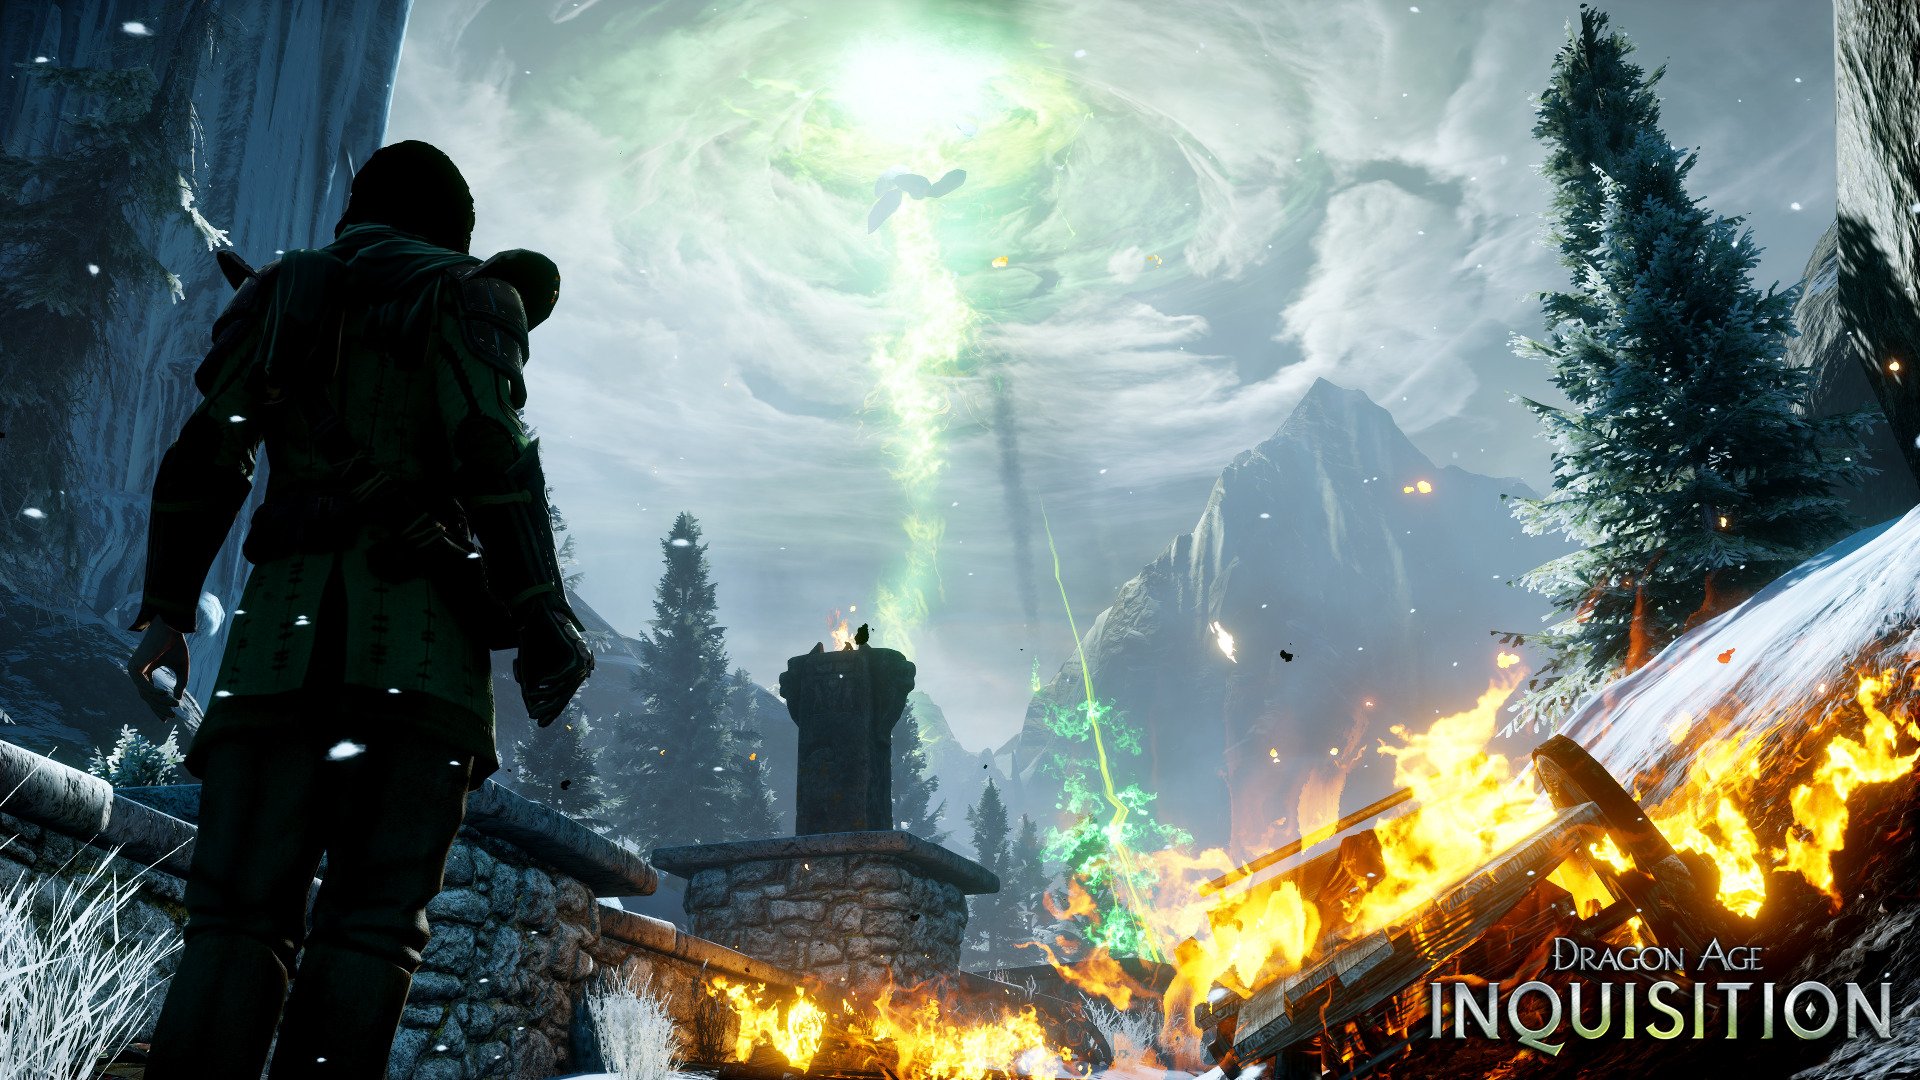 dragon age inquisition wallpaper,action adventure game,pc game,world,games,geological phenomenon